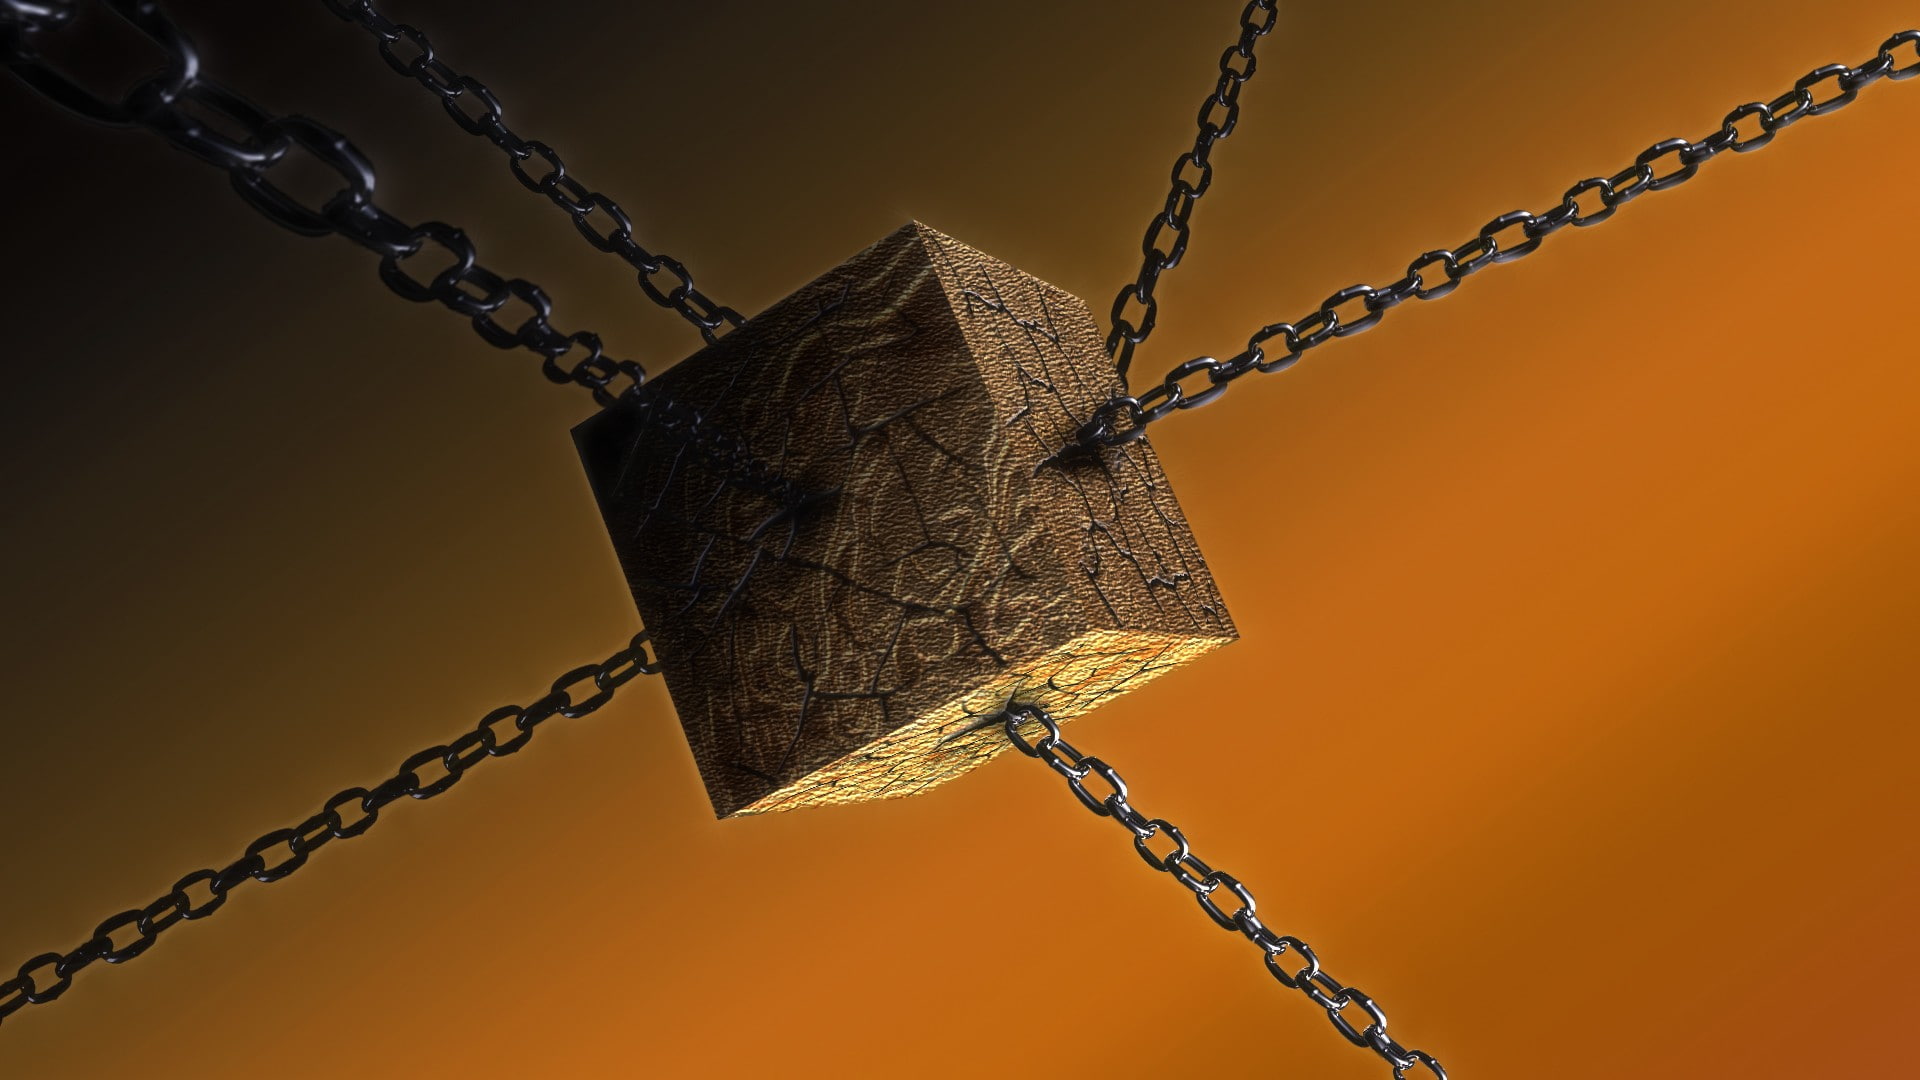 cube, chains, no people, metal, close-up, hanging, rope, orange color